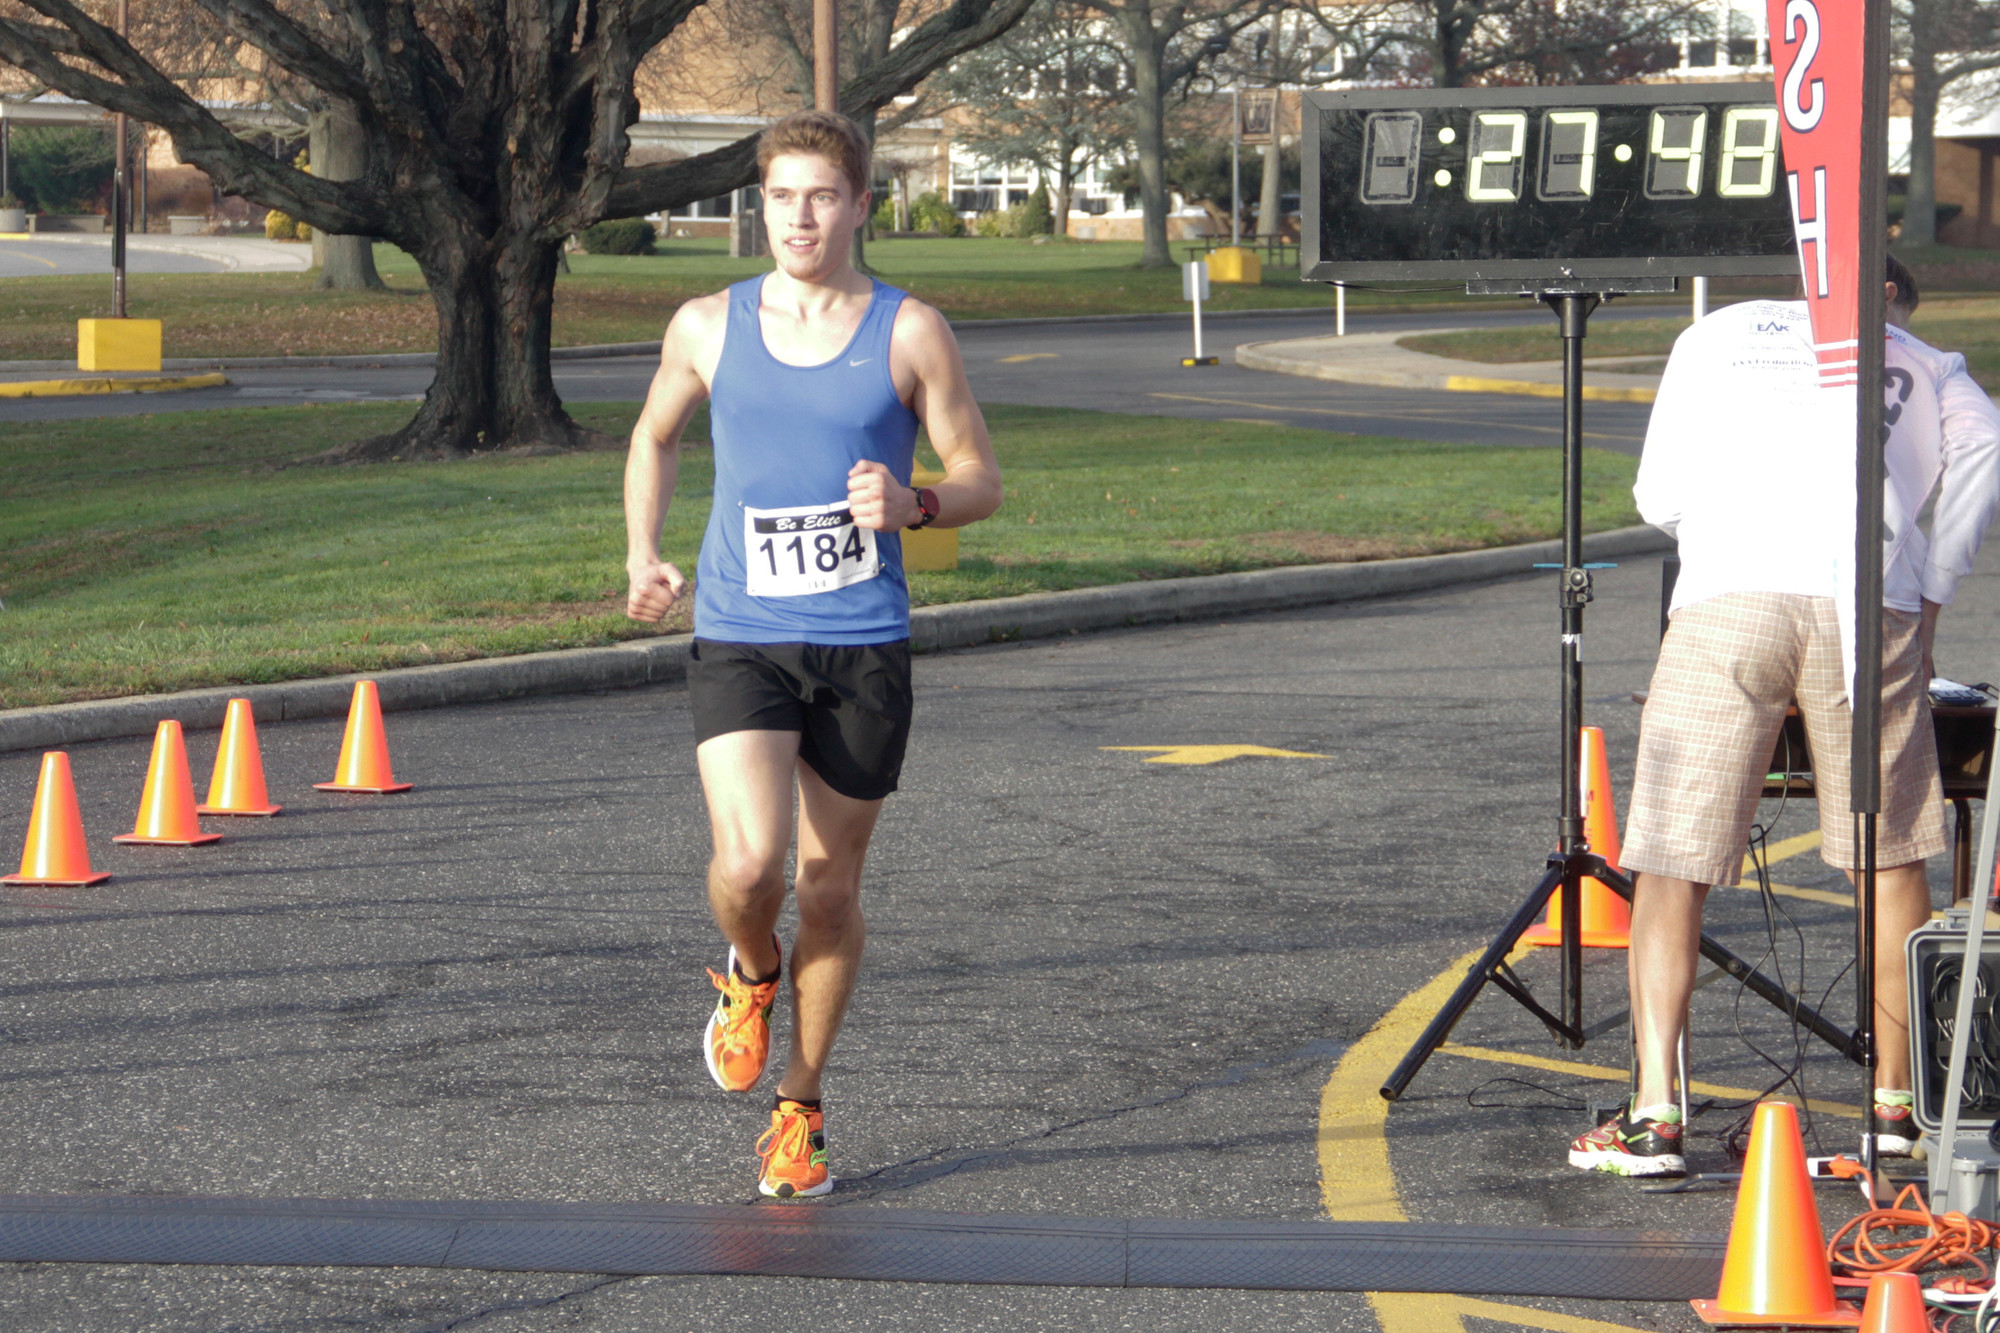 Michael Darnell, of Wantagh, was the top finisher in the Chamber of Commerce’s Snowball Run, which returned last Saturday morning for the first time since 2012.